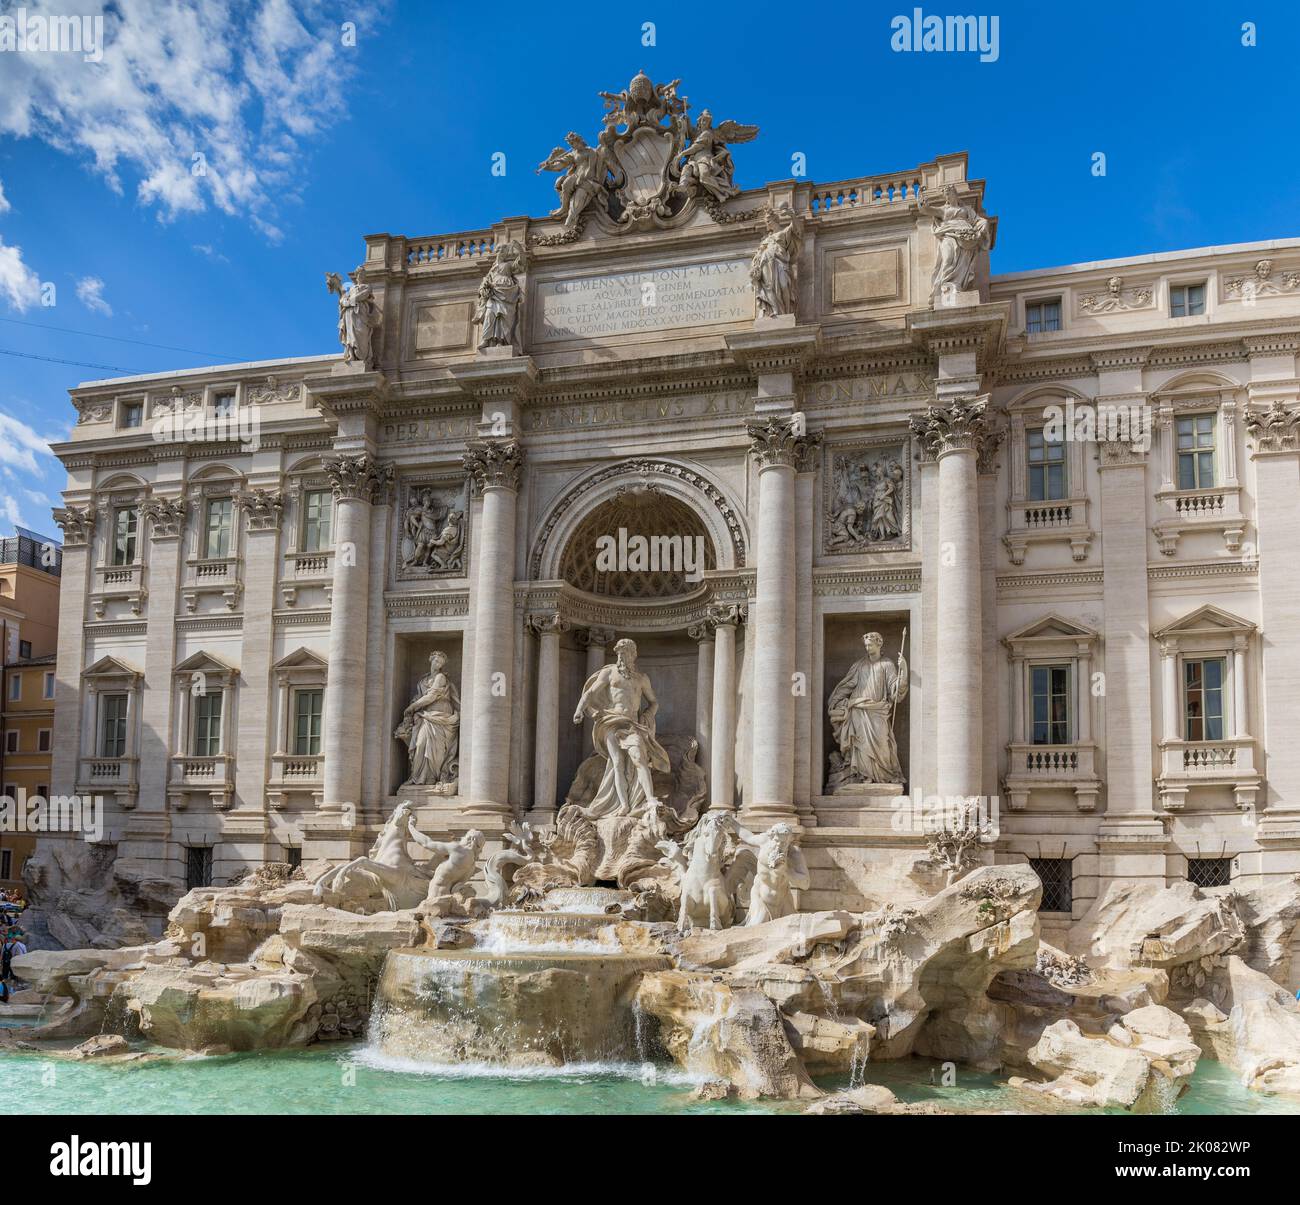 The ‘Fontana di Trevi’(Trevi Fountain) is perhaps the most famous fountain in the world in Rome, Italy. Stock Photo